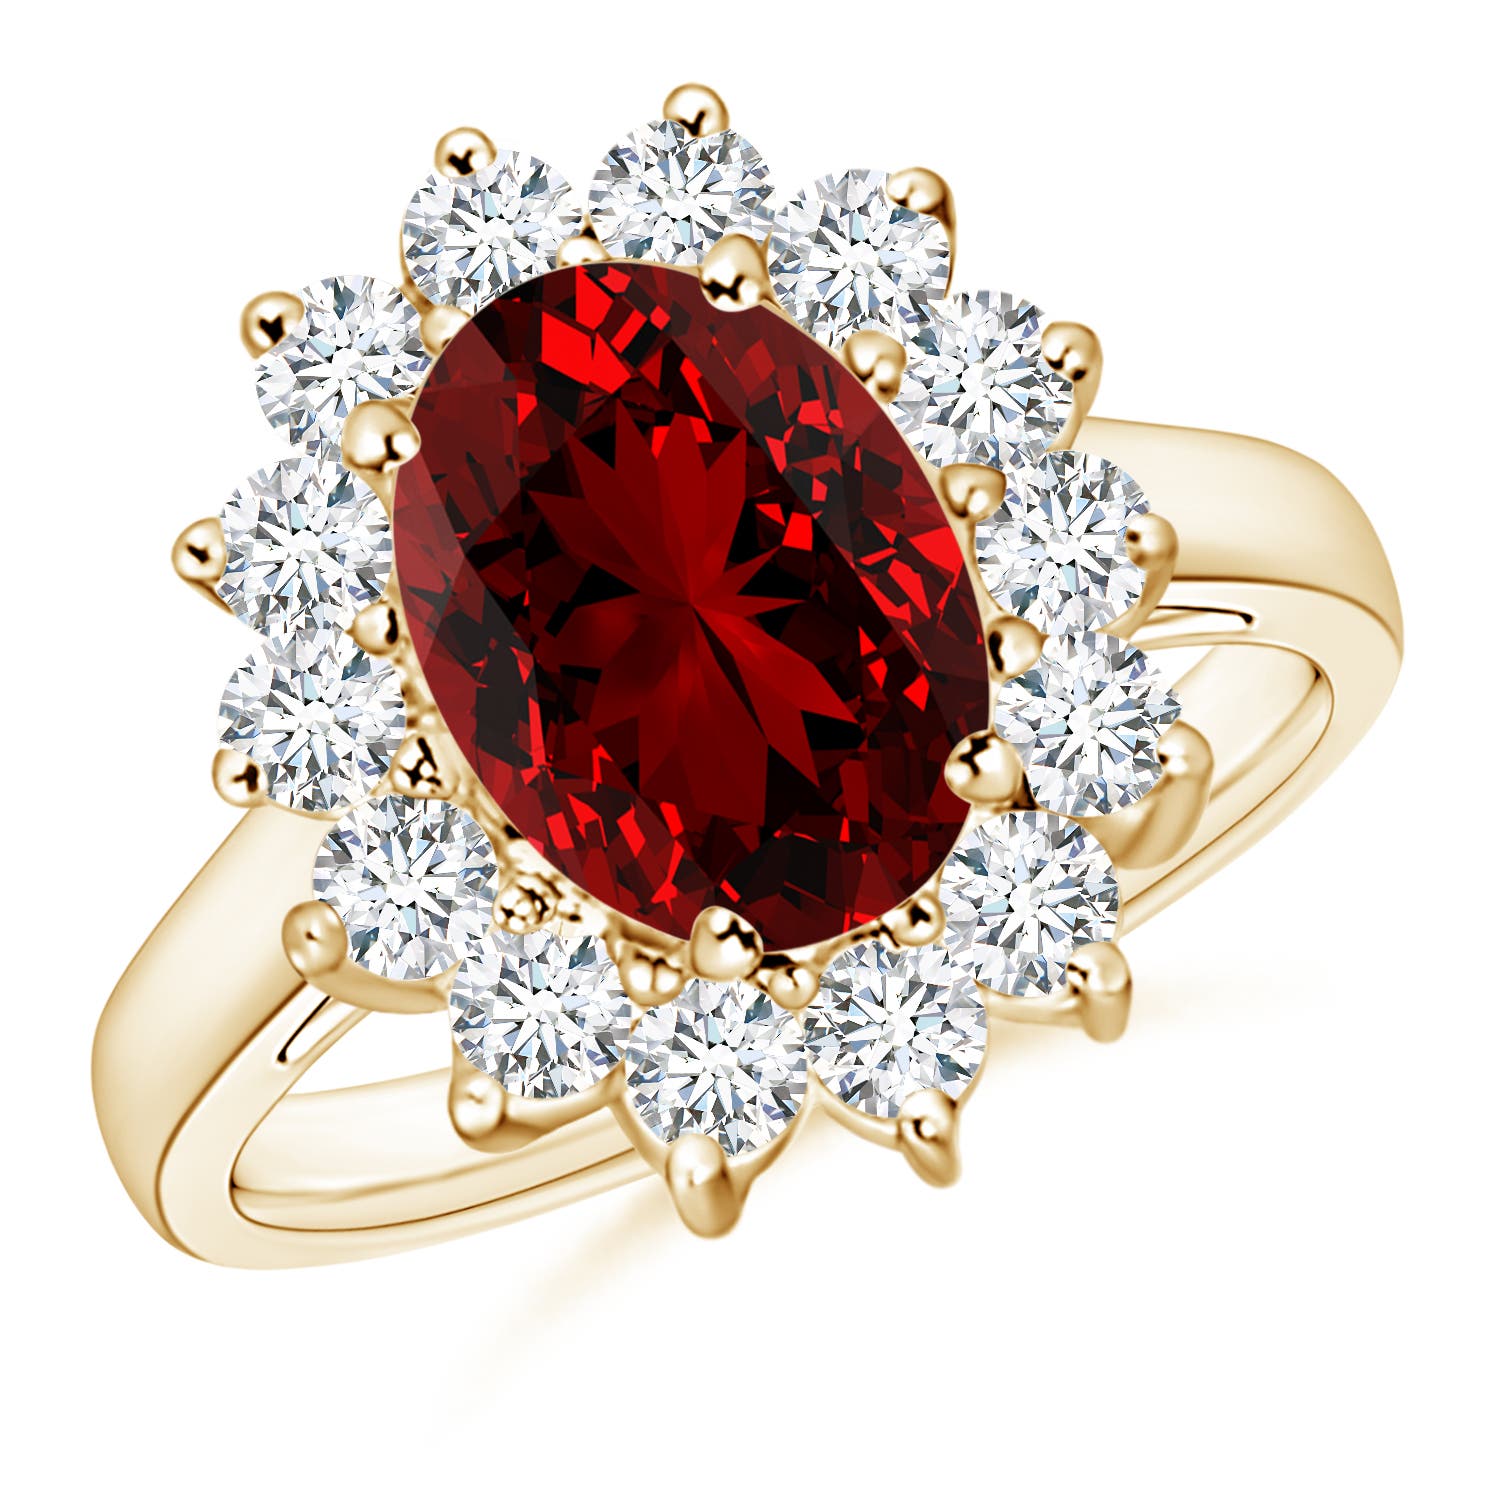 Lab-Grown Emerald-Cut Ruby Engagement Ring with Lab Diamonds | Angara